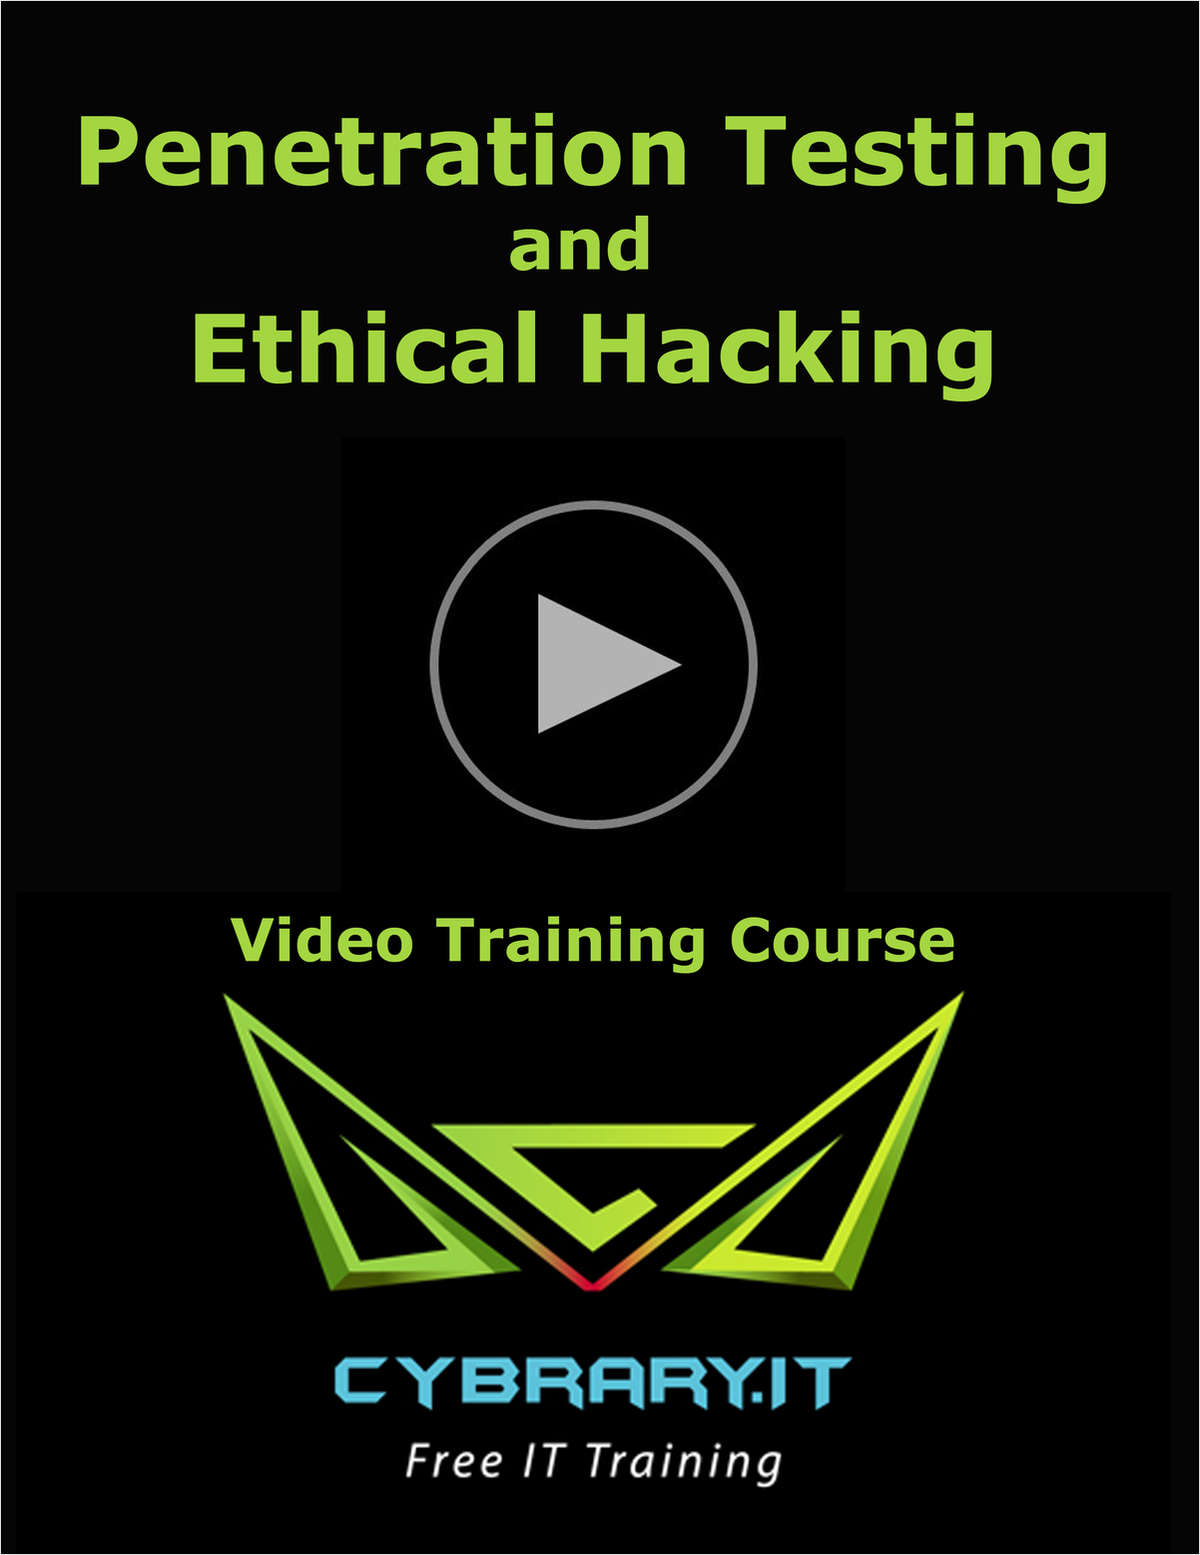 Online Penetration Testing and Ethical Hacking - FREE Video Training Course